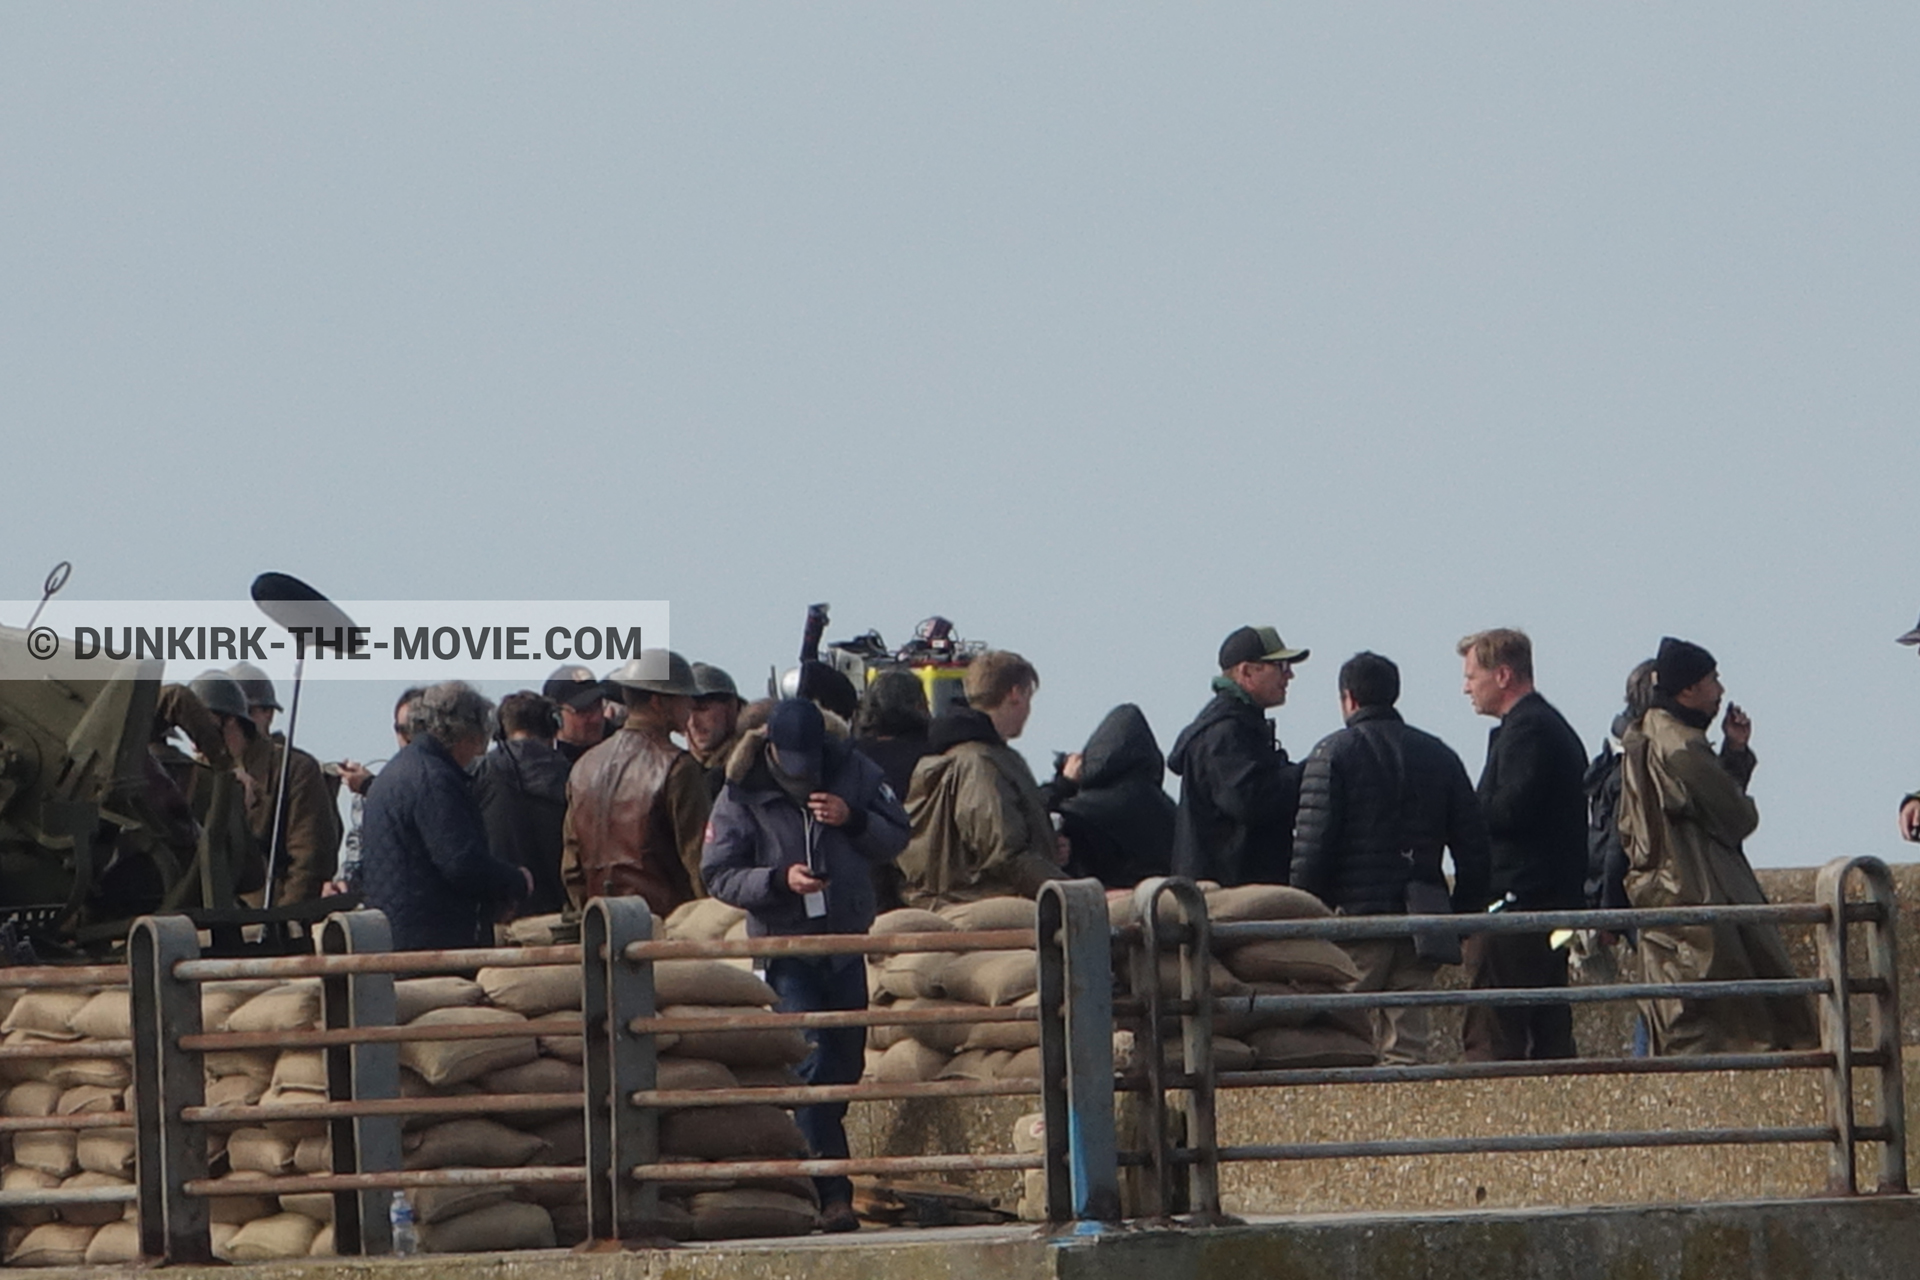 Picture with supernumeraries, EST pier, Christopher Nolan,  from behind the scene of the Dunkirk movie by Nolan